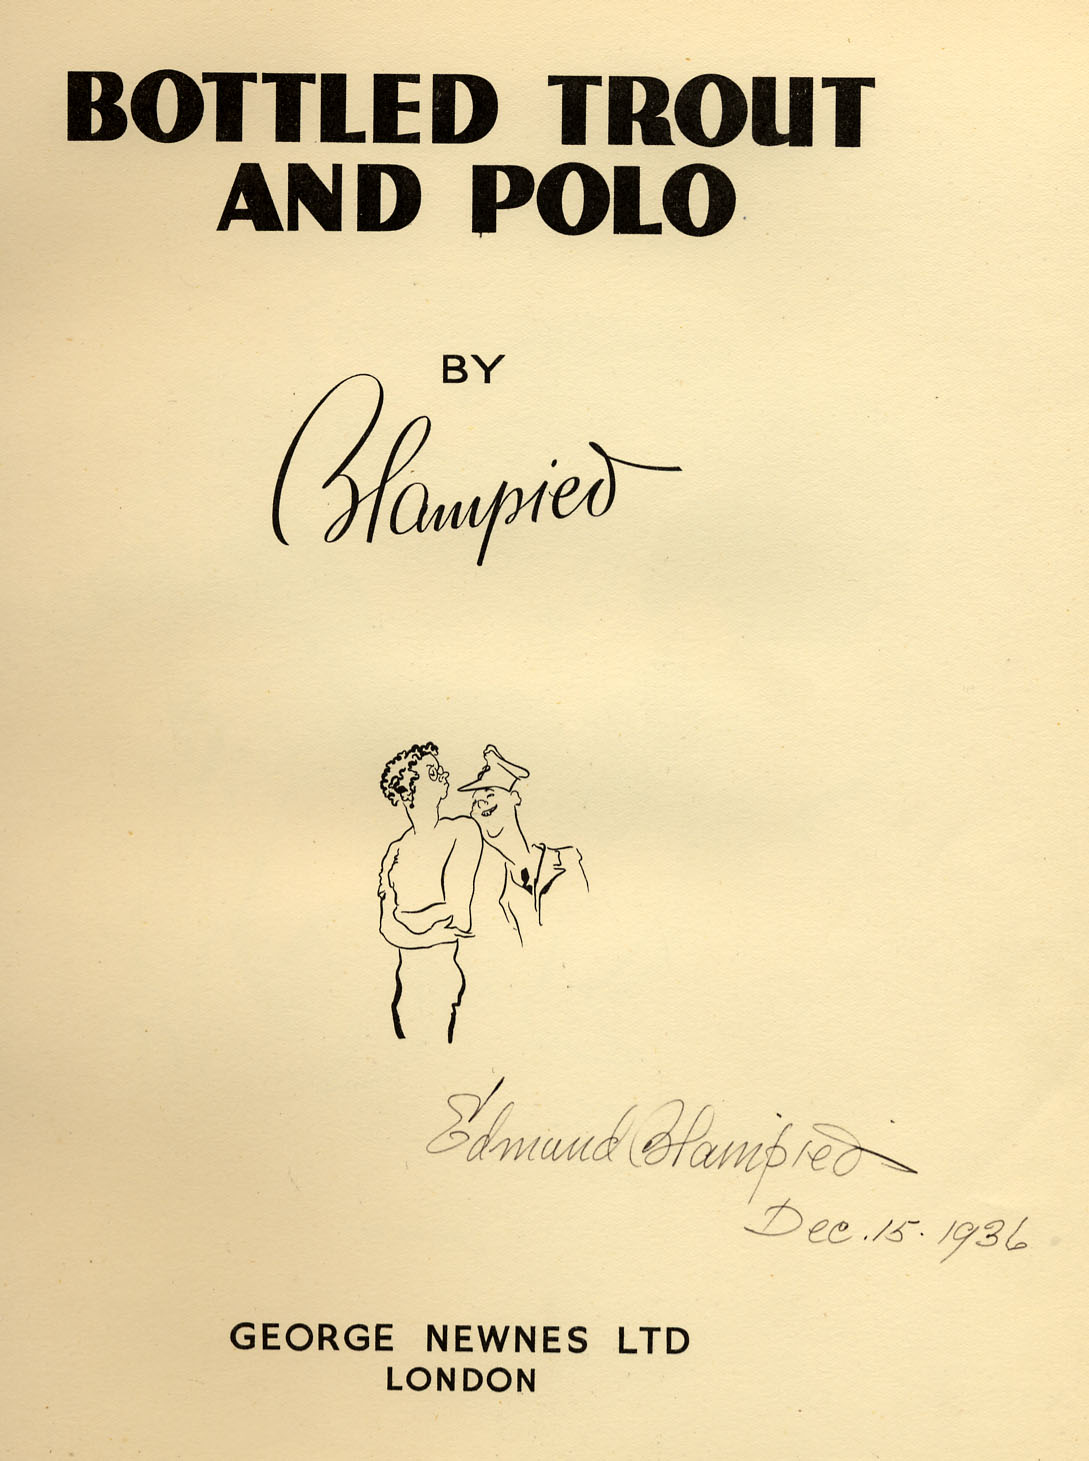 Image of title page